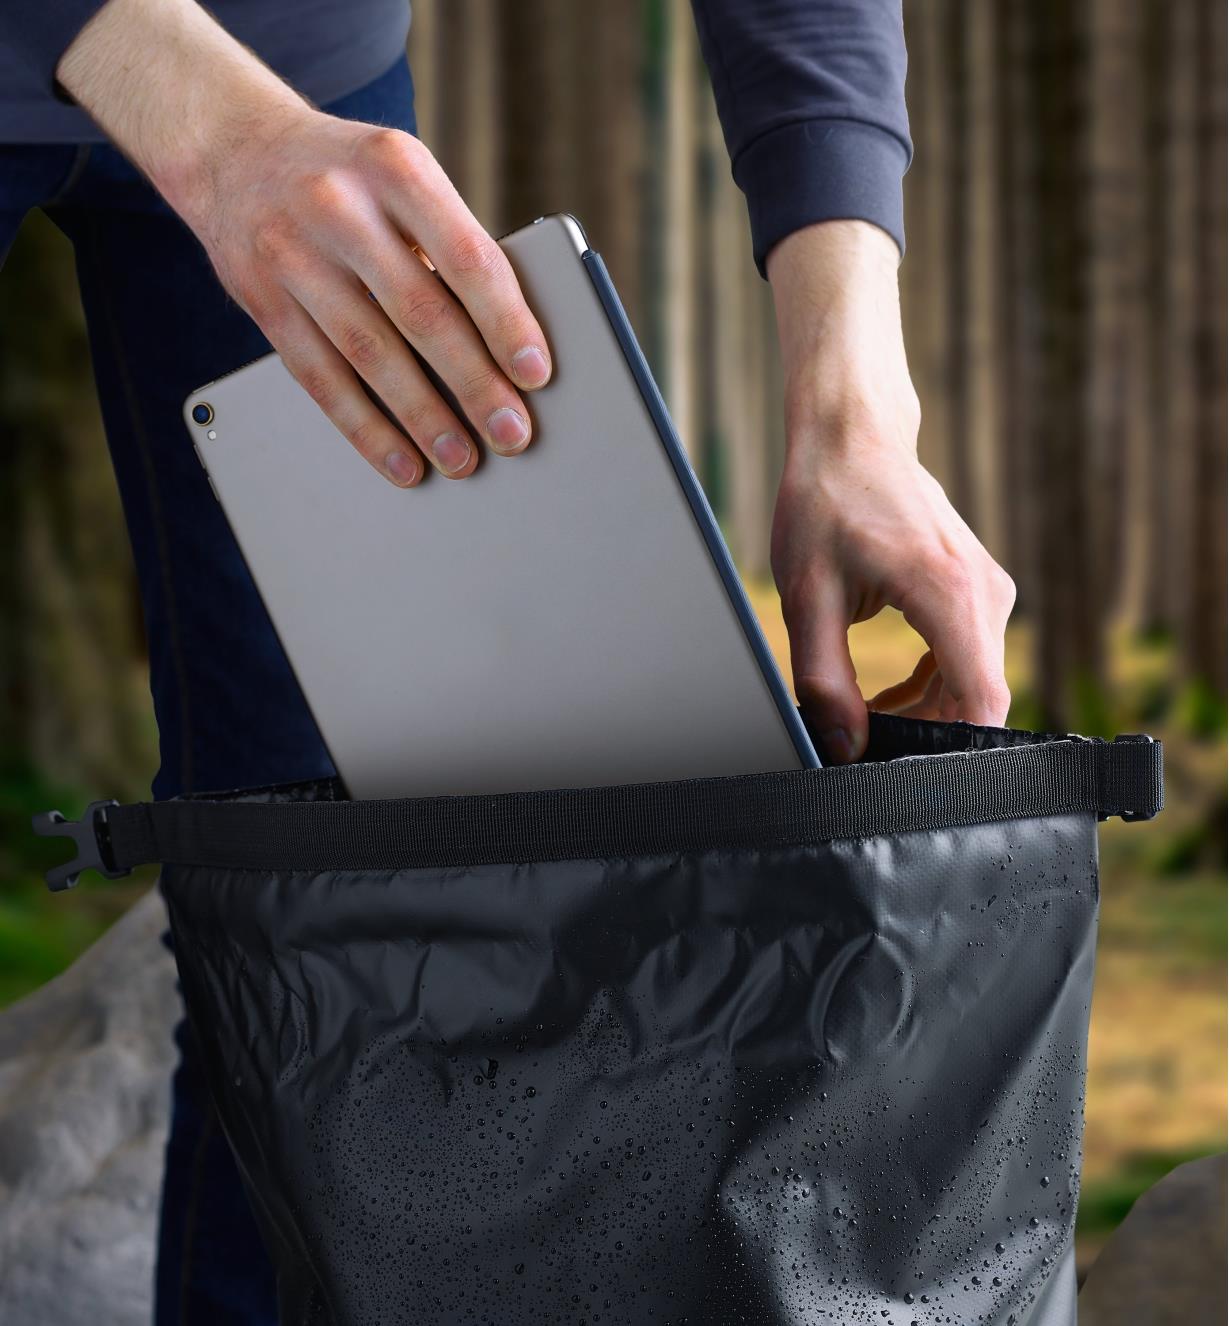 A tablet is placed inside the waterproof dry bag backpack through the roll-top opening